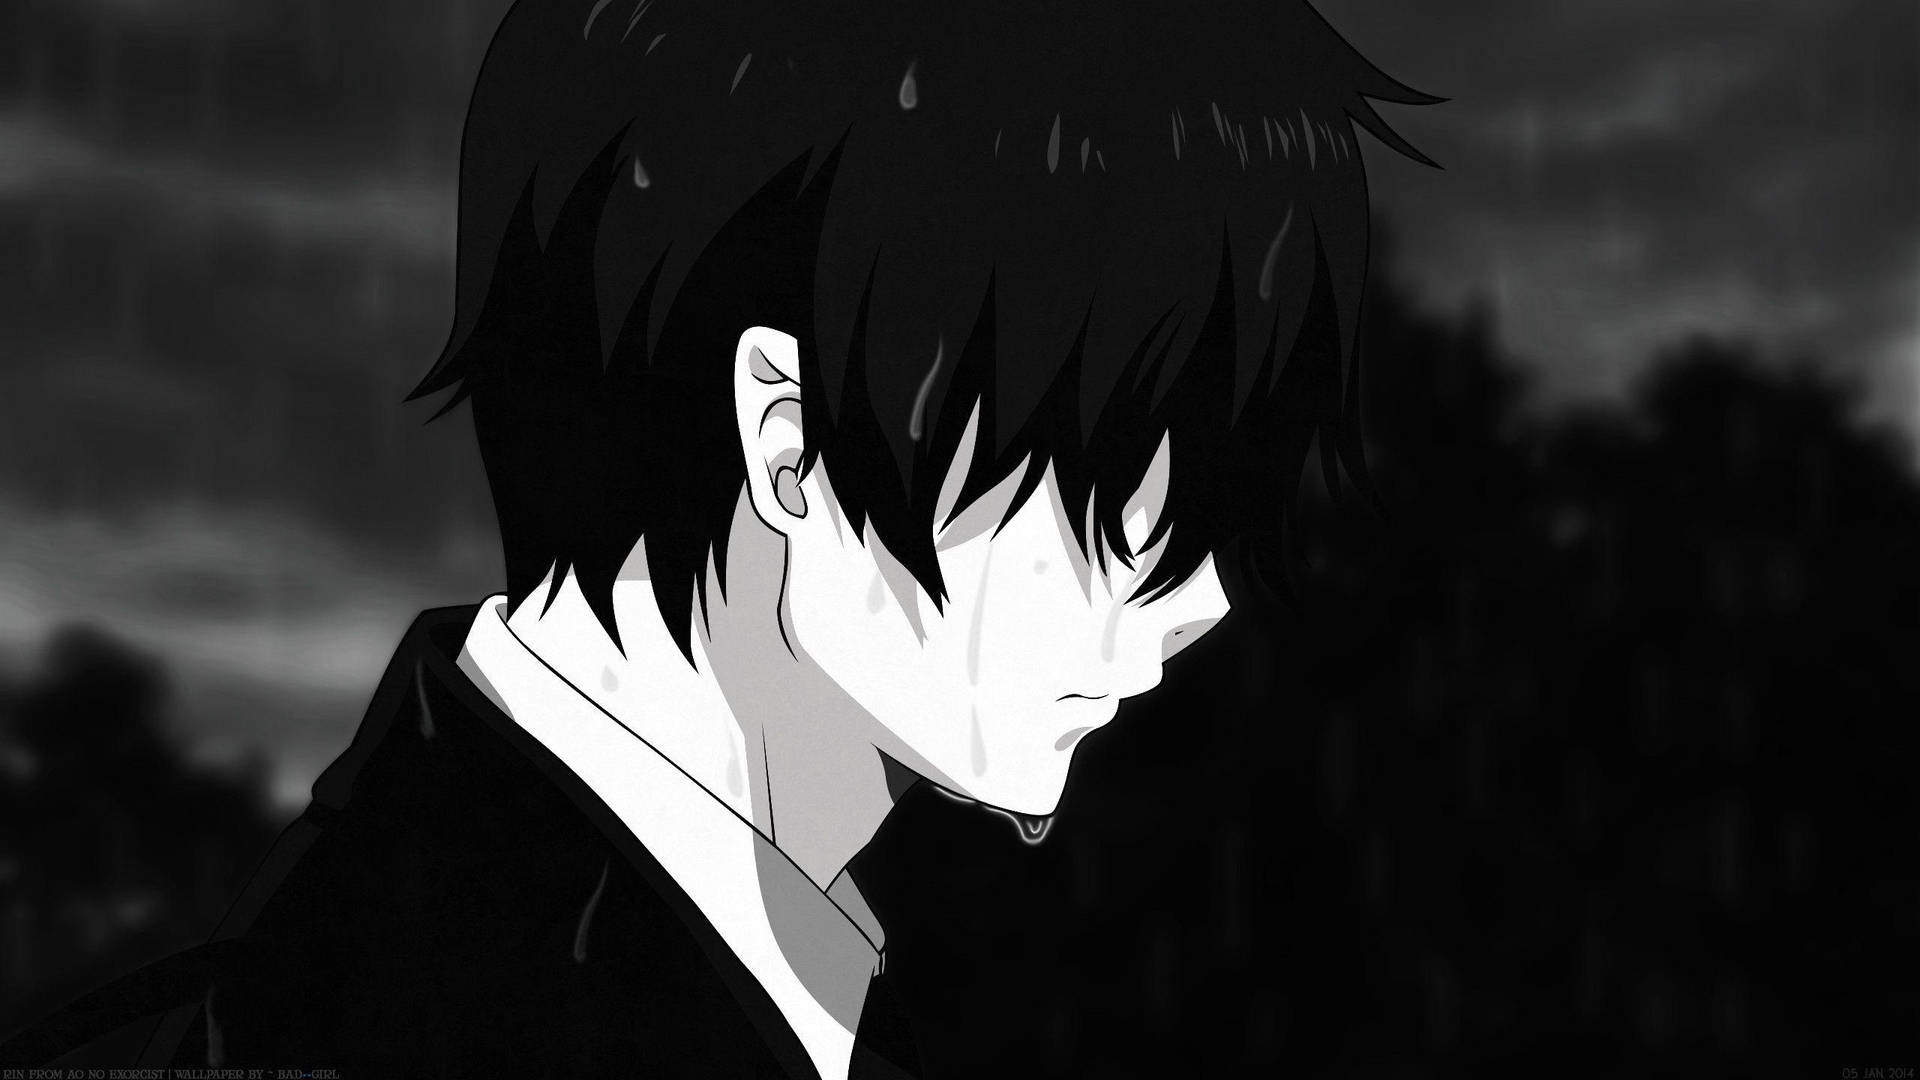 Cute Black And White Aesthetic Anime Boy Crying